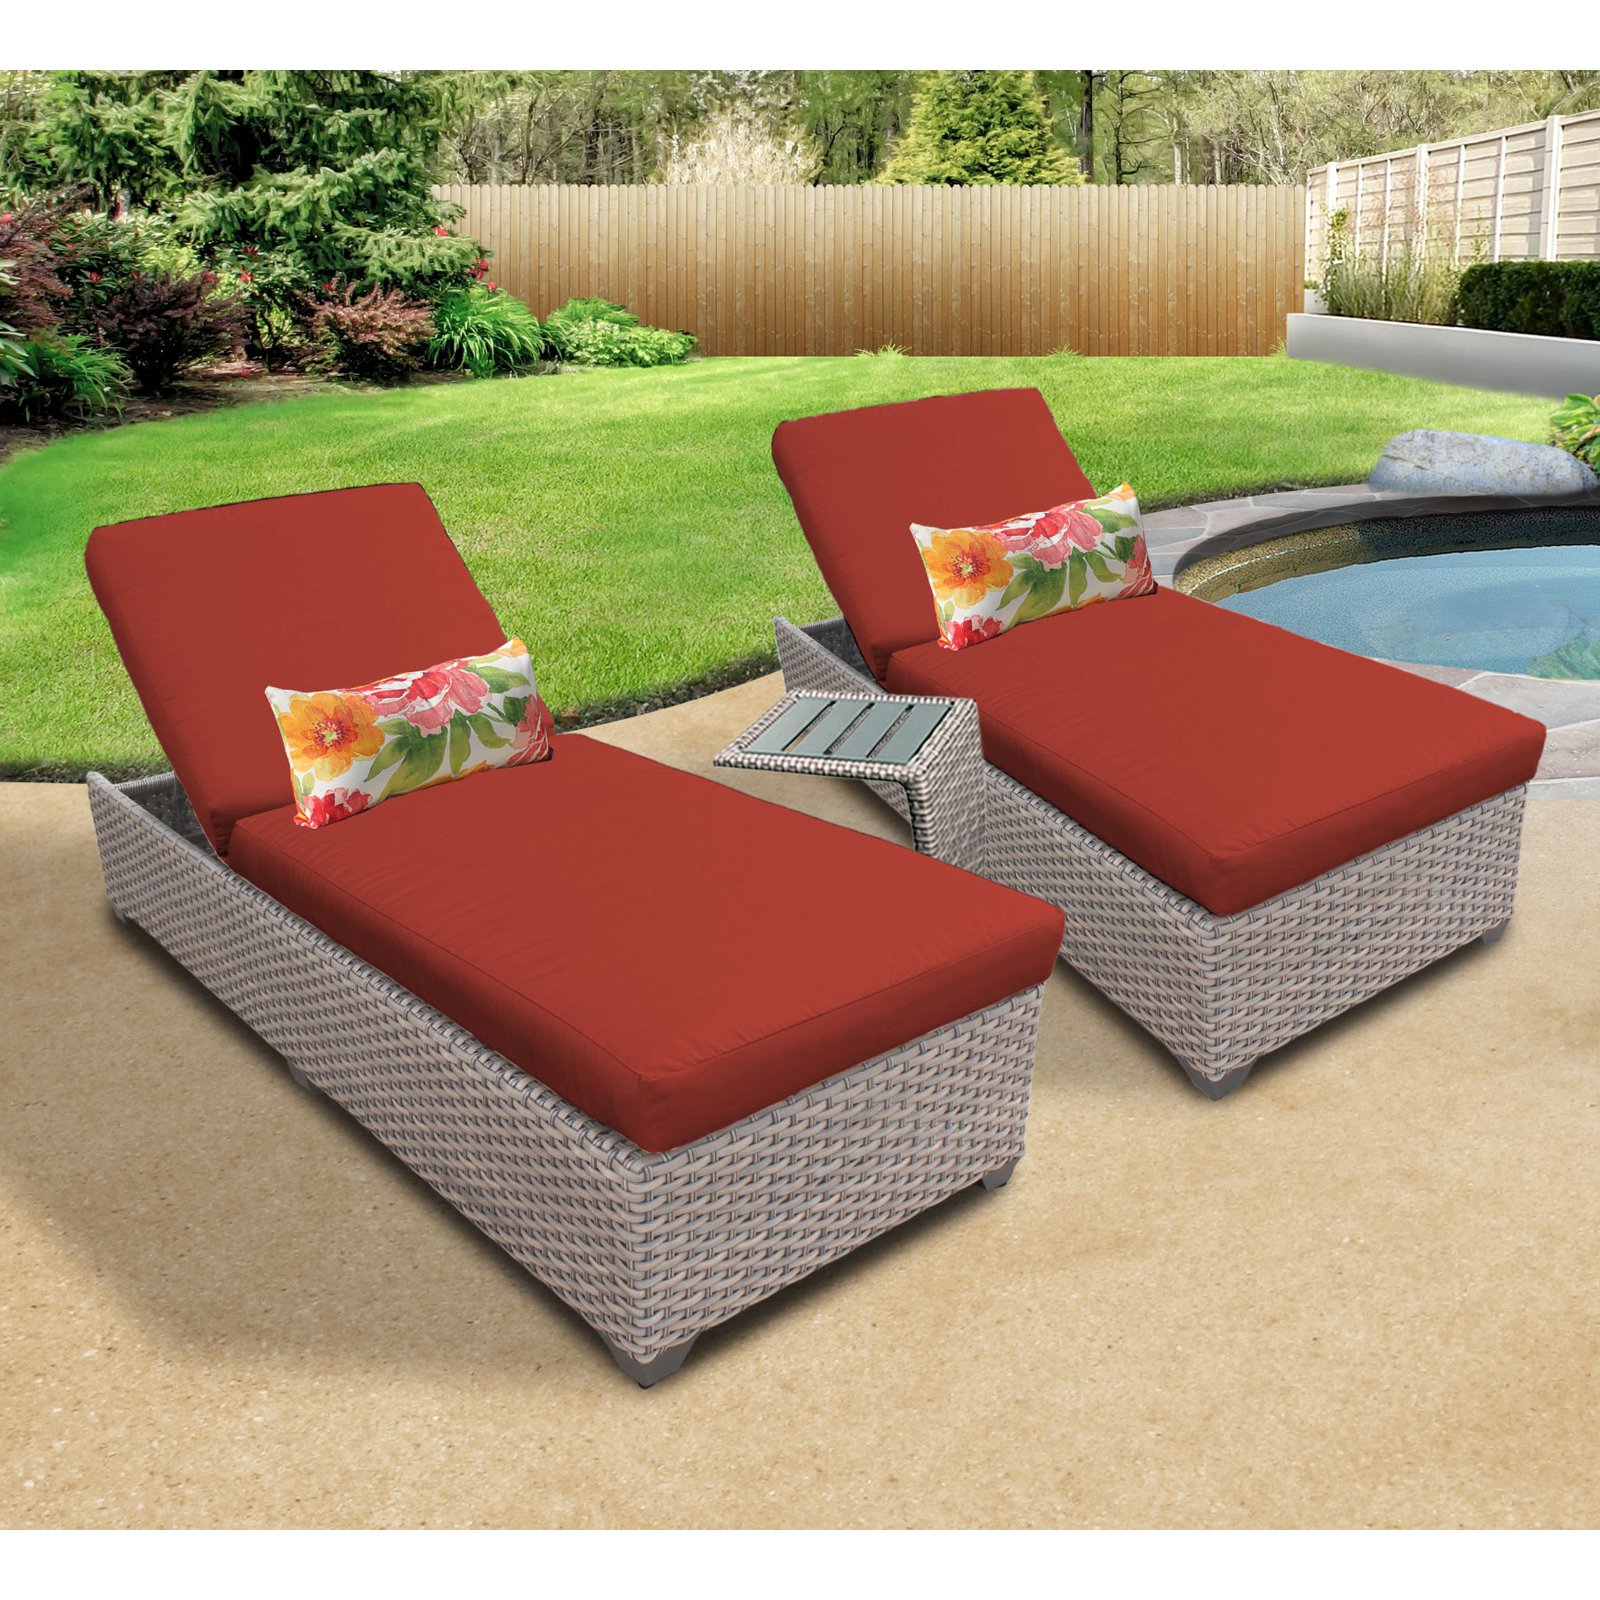 Monterey Patio Furniture Wicker Chaise Lounge - image 4 of 7